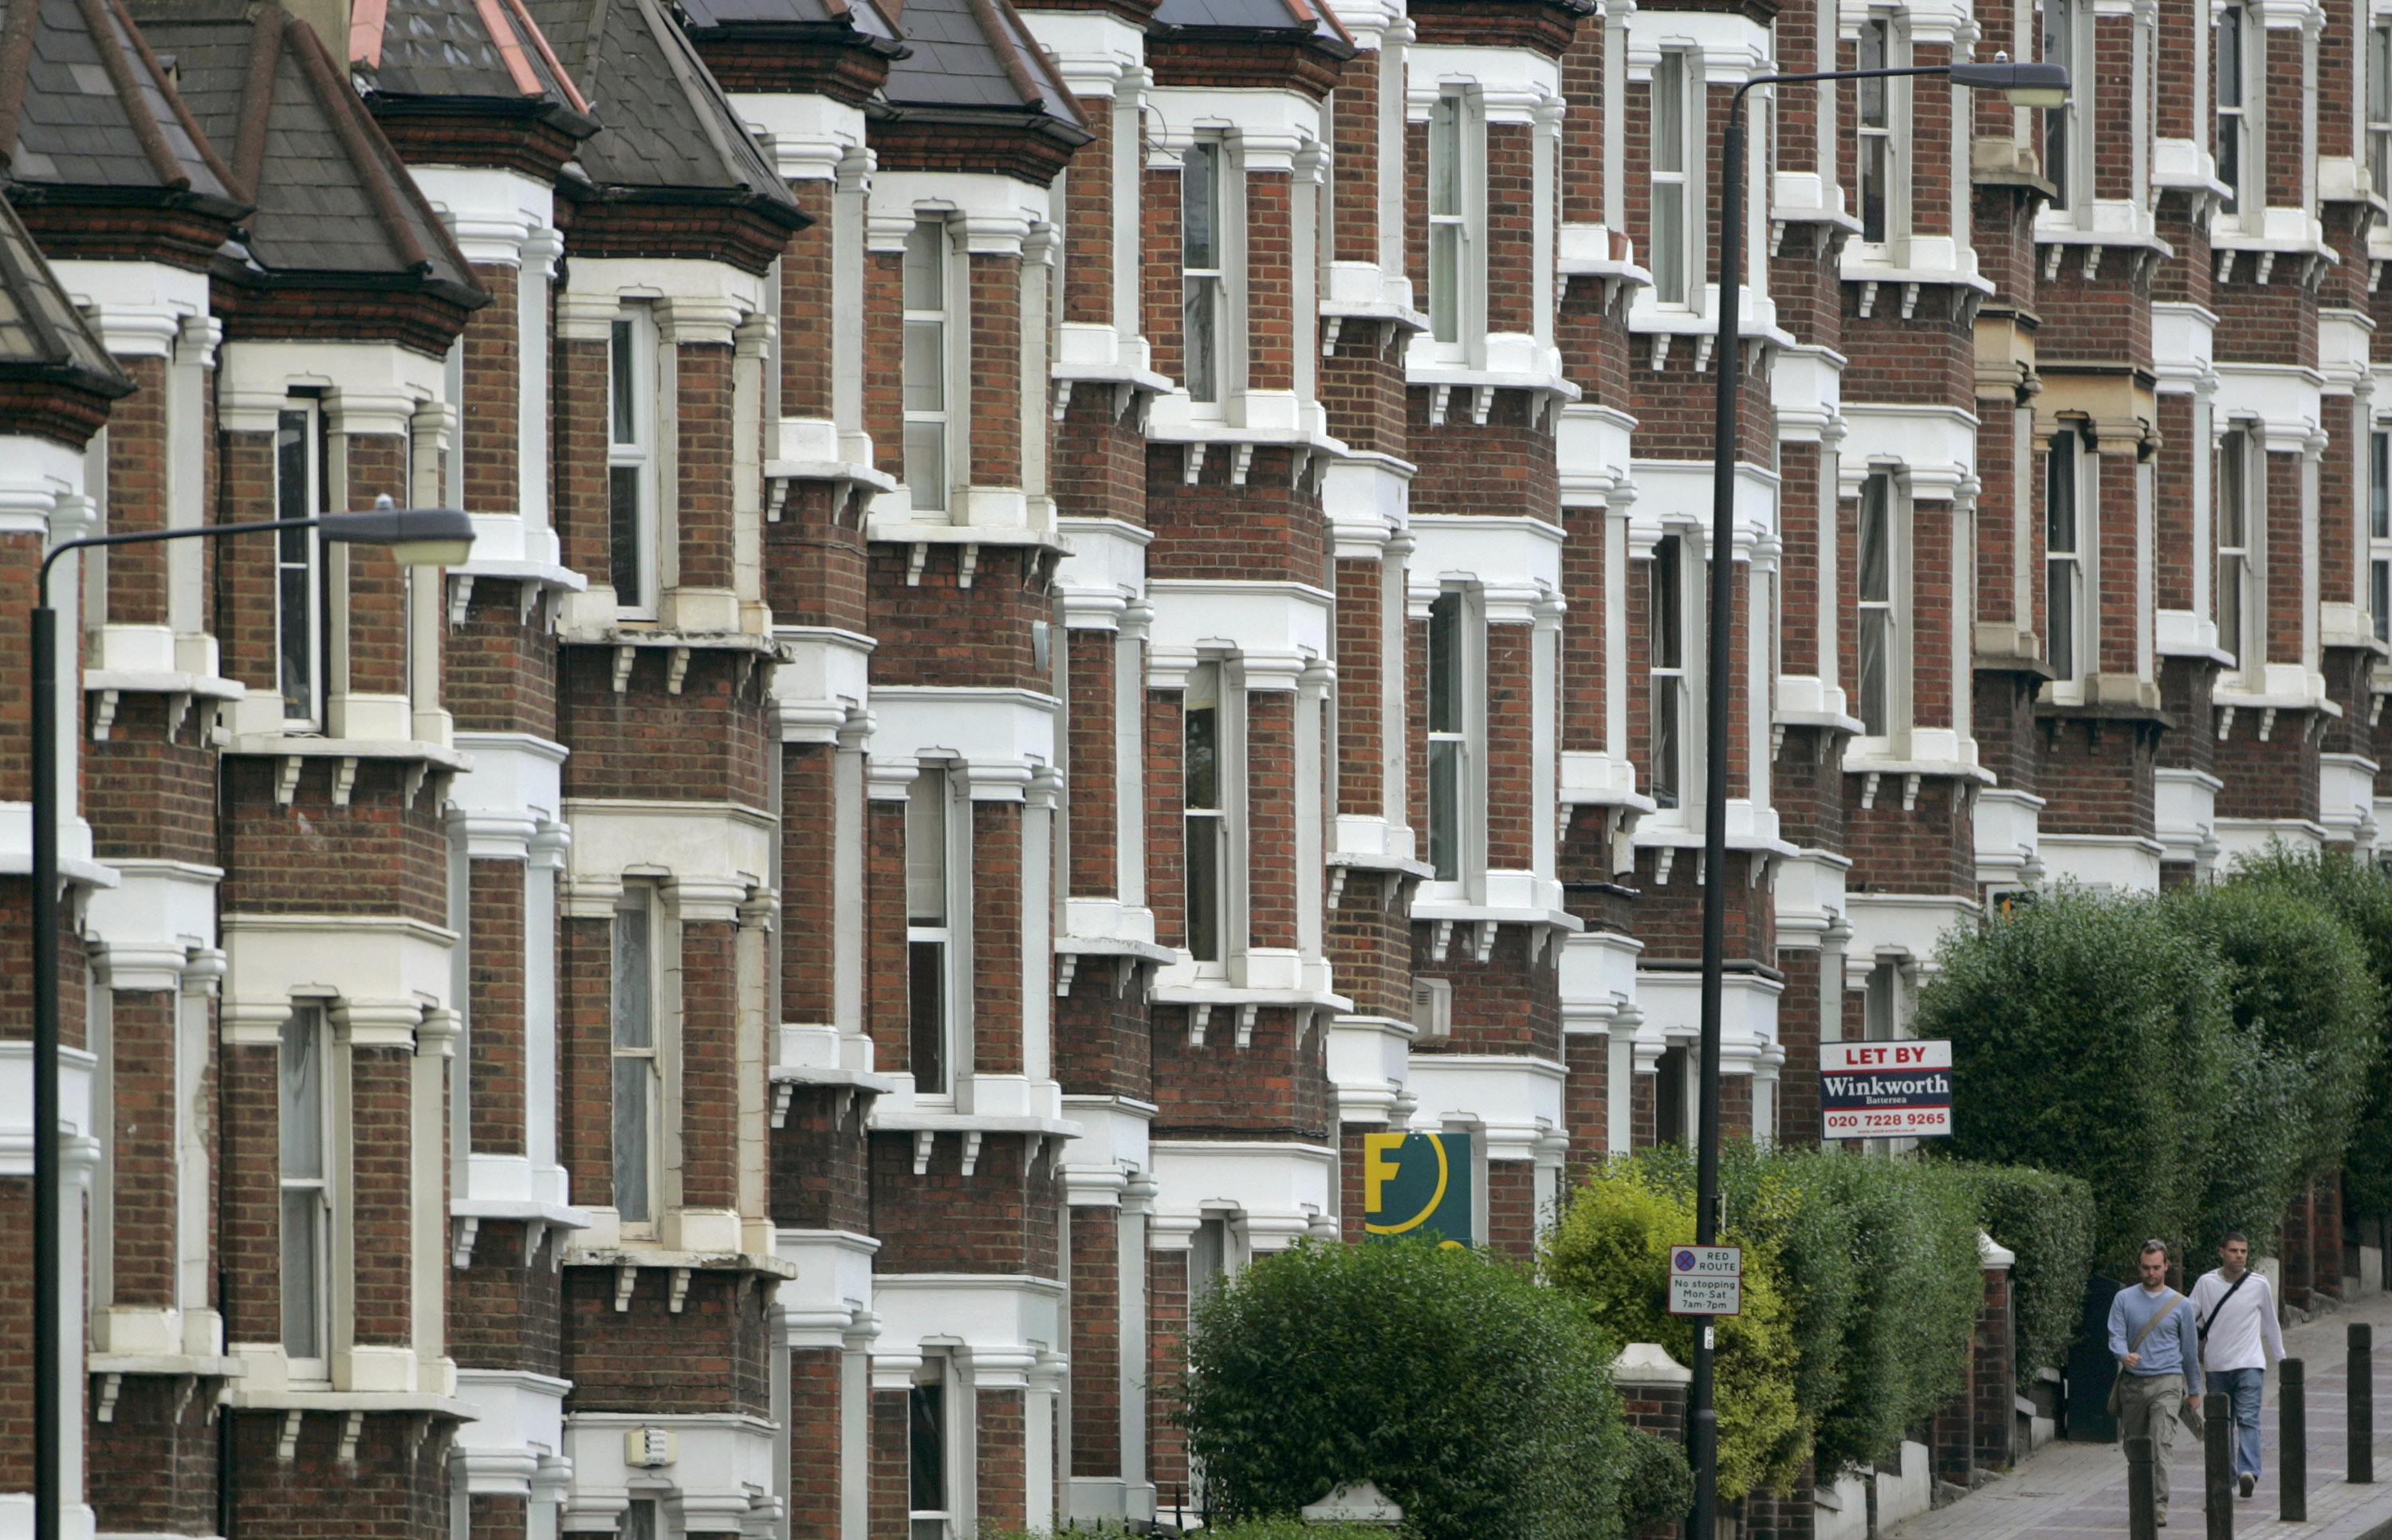 People are seen walking past estate agent signs outside a row of houses in south London, in this file photograph dated May 18, 2007. They have pocketed some of the most lucrative returns available to investors in recent decades and been a staple of newspapers' personal finance pages, but tougher times now lie ahead for Britain's army of small-time landlords. REUTERS/Toby Melville/Files